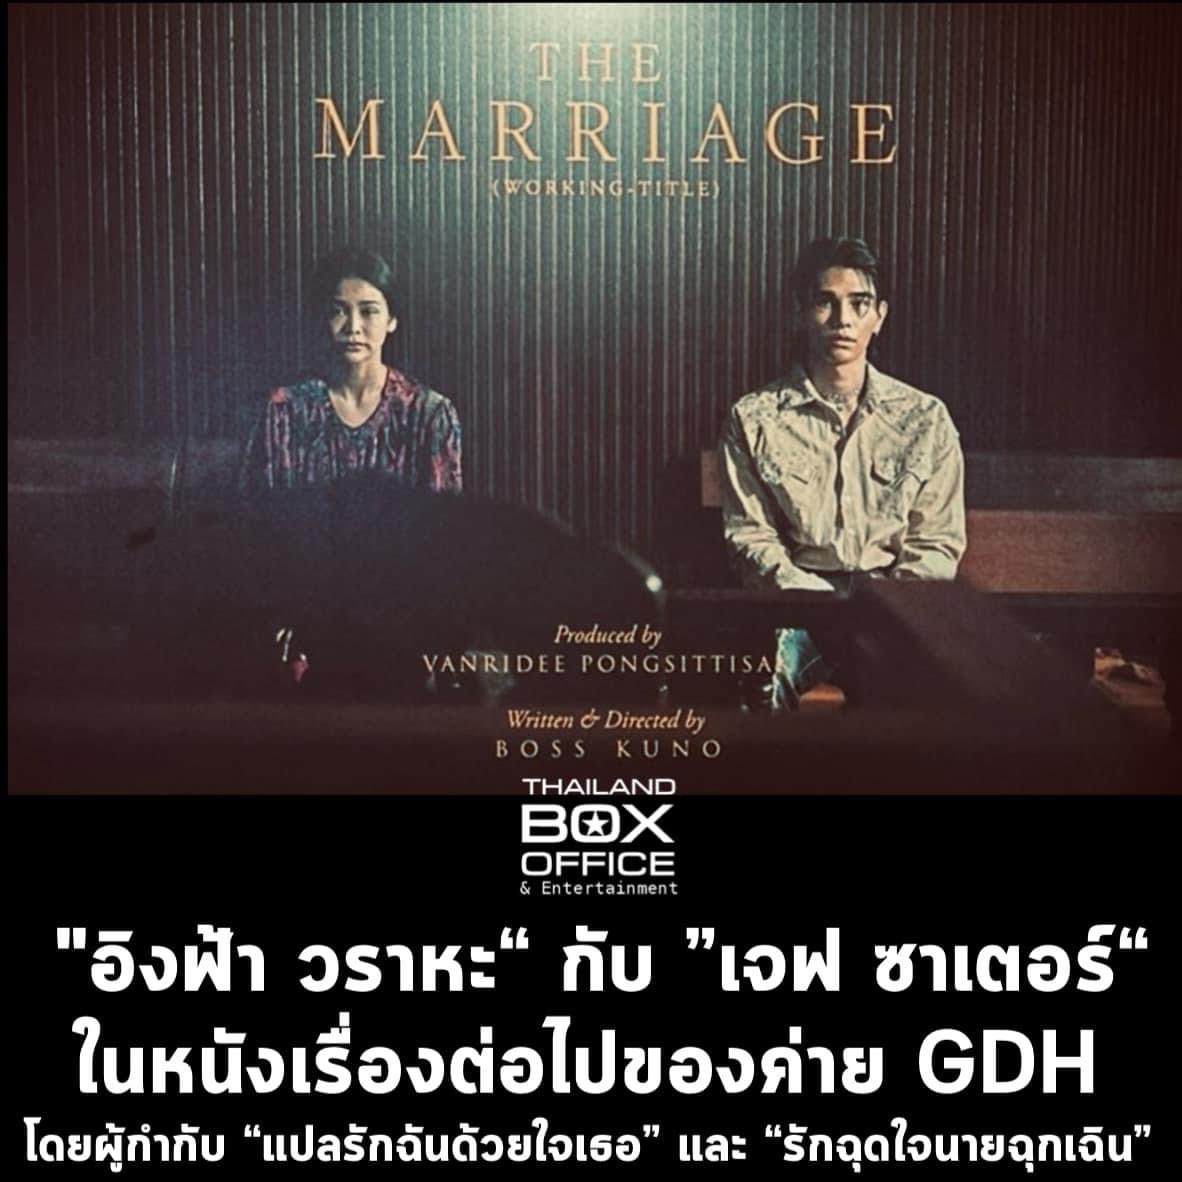 I'M SO EXCITED!!!🥹🥹
#TheMarriage #jeffsatur #EngfaWaraha